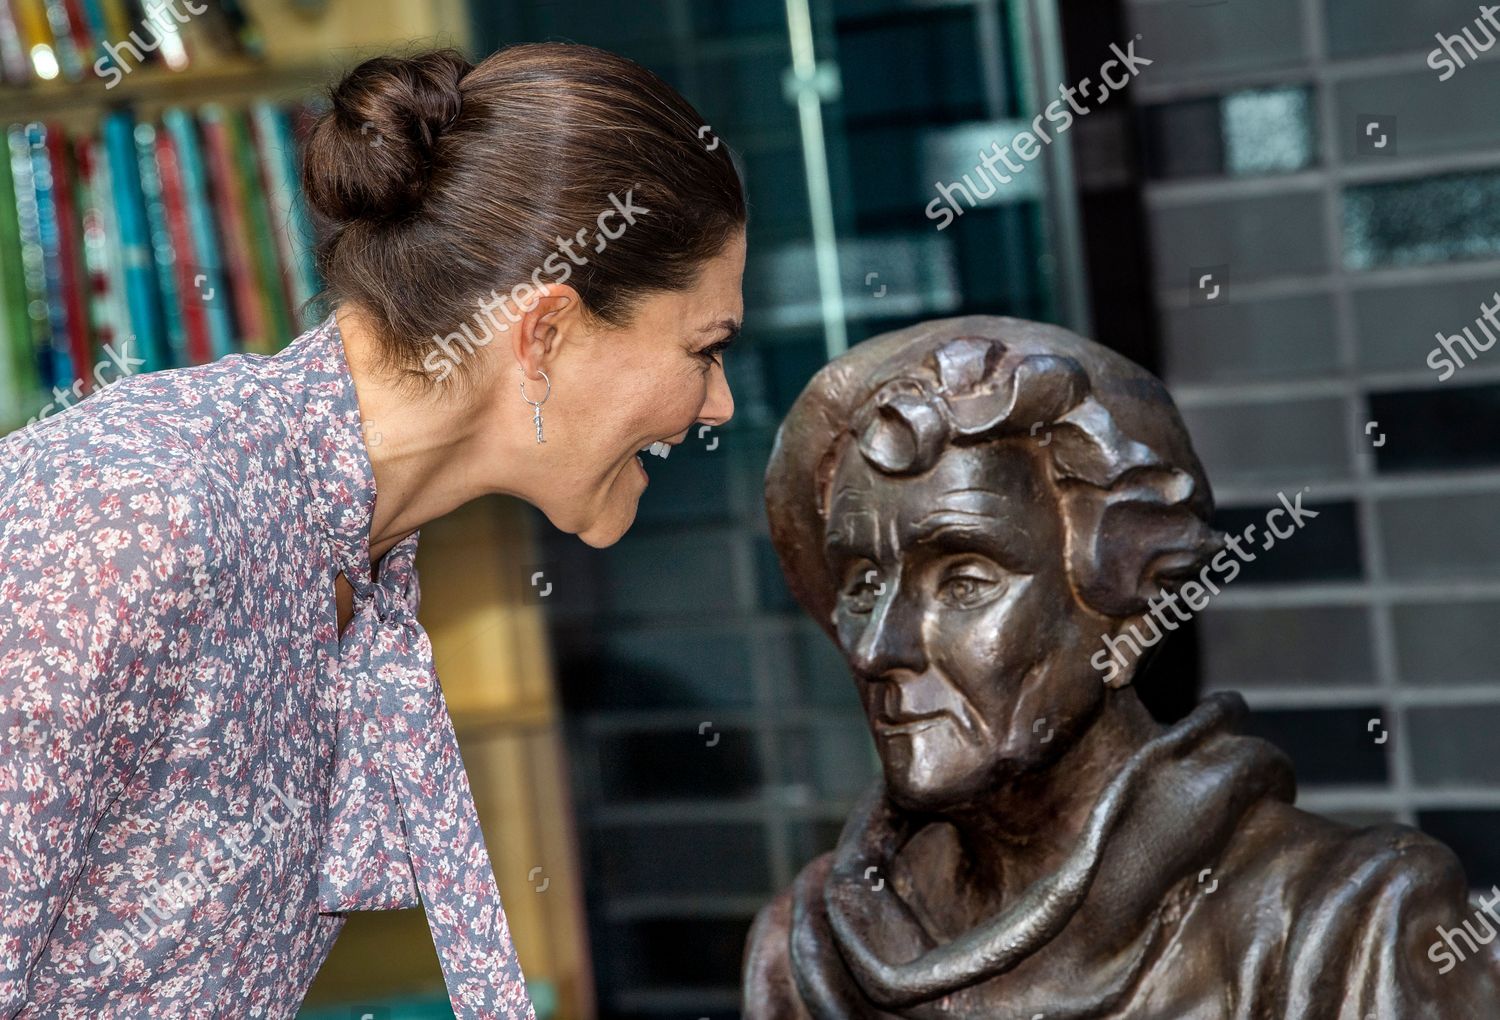 crown-princess-victoria-attends-inauguration-of-a-sculpture-depicting-childrens-book-author-astrid-lindgren-astrid-lindgren-childrens-hospital-solna-outside-stockholm-sweden-shutterstock-editorial-10945887r.jpg